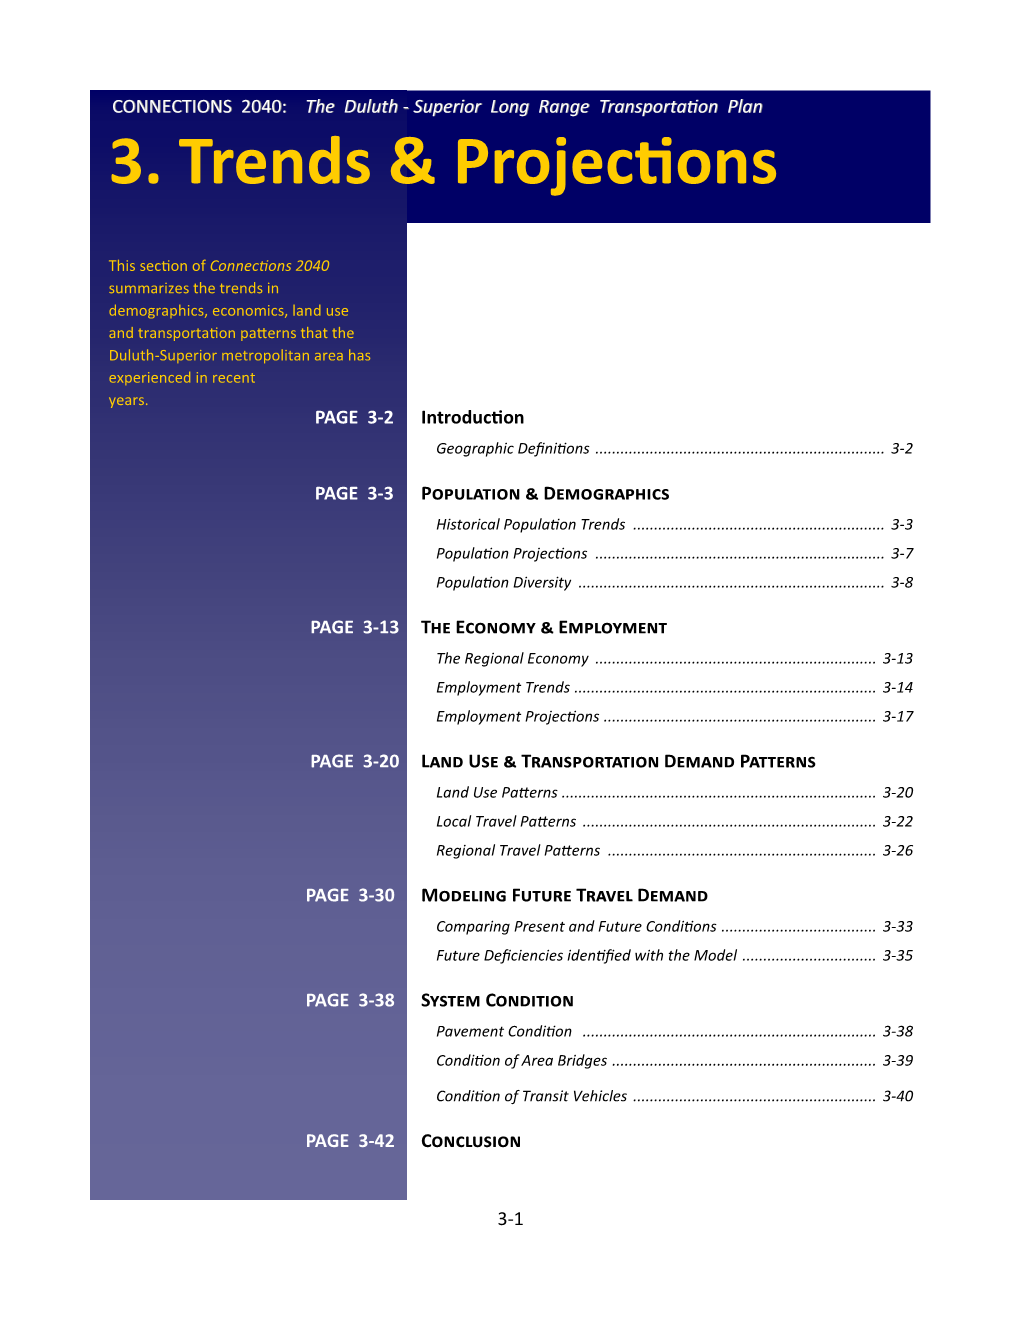 3. Trends & Projections